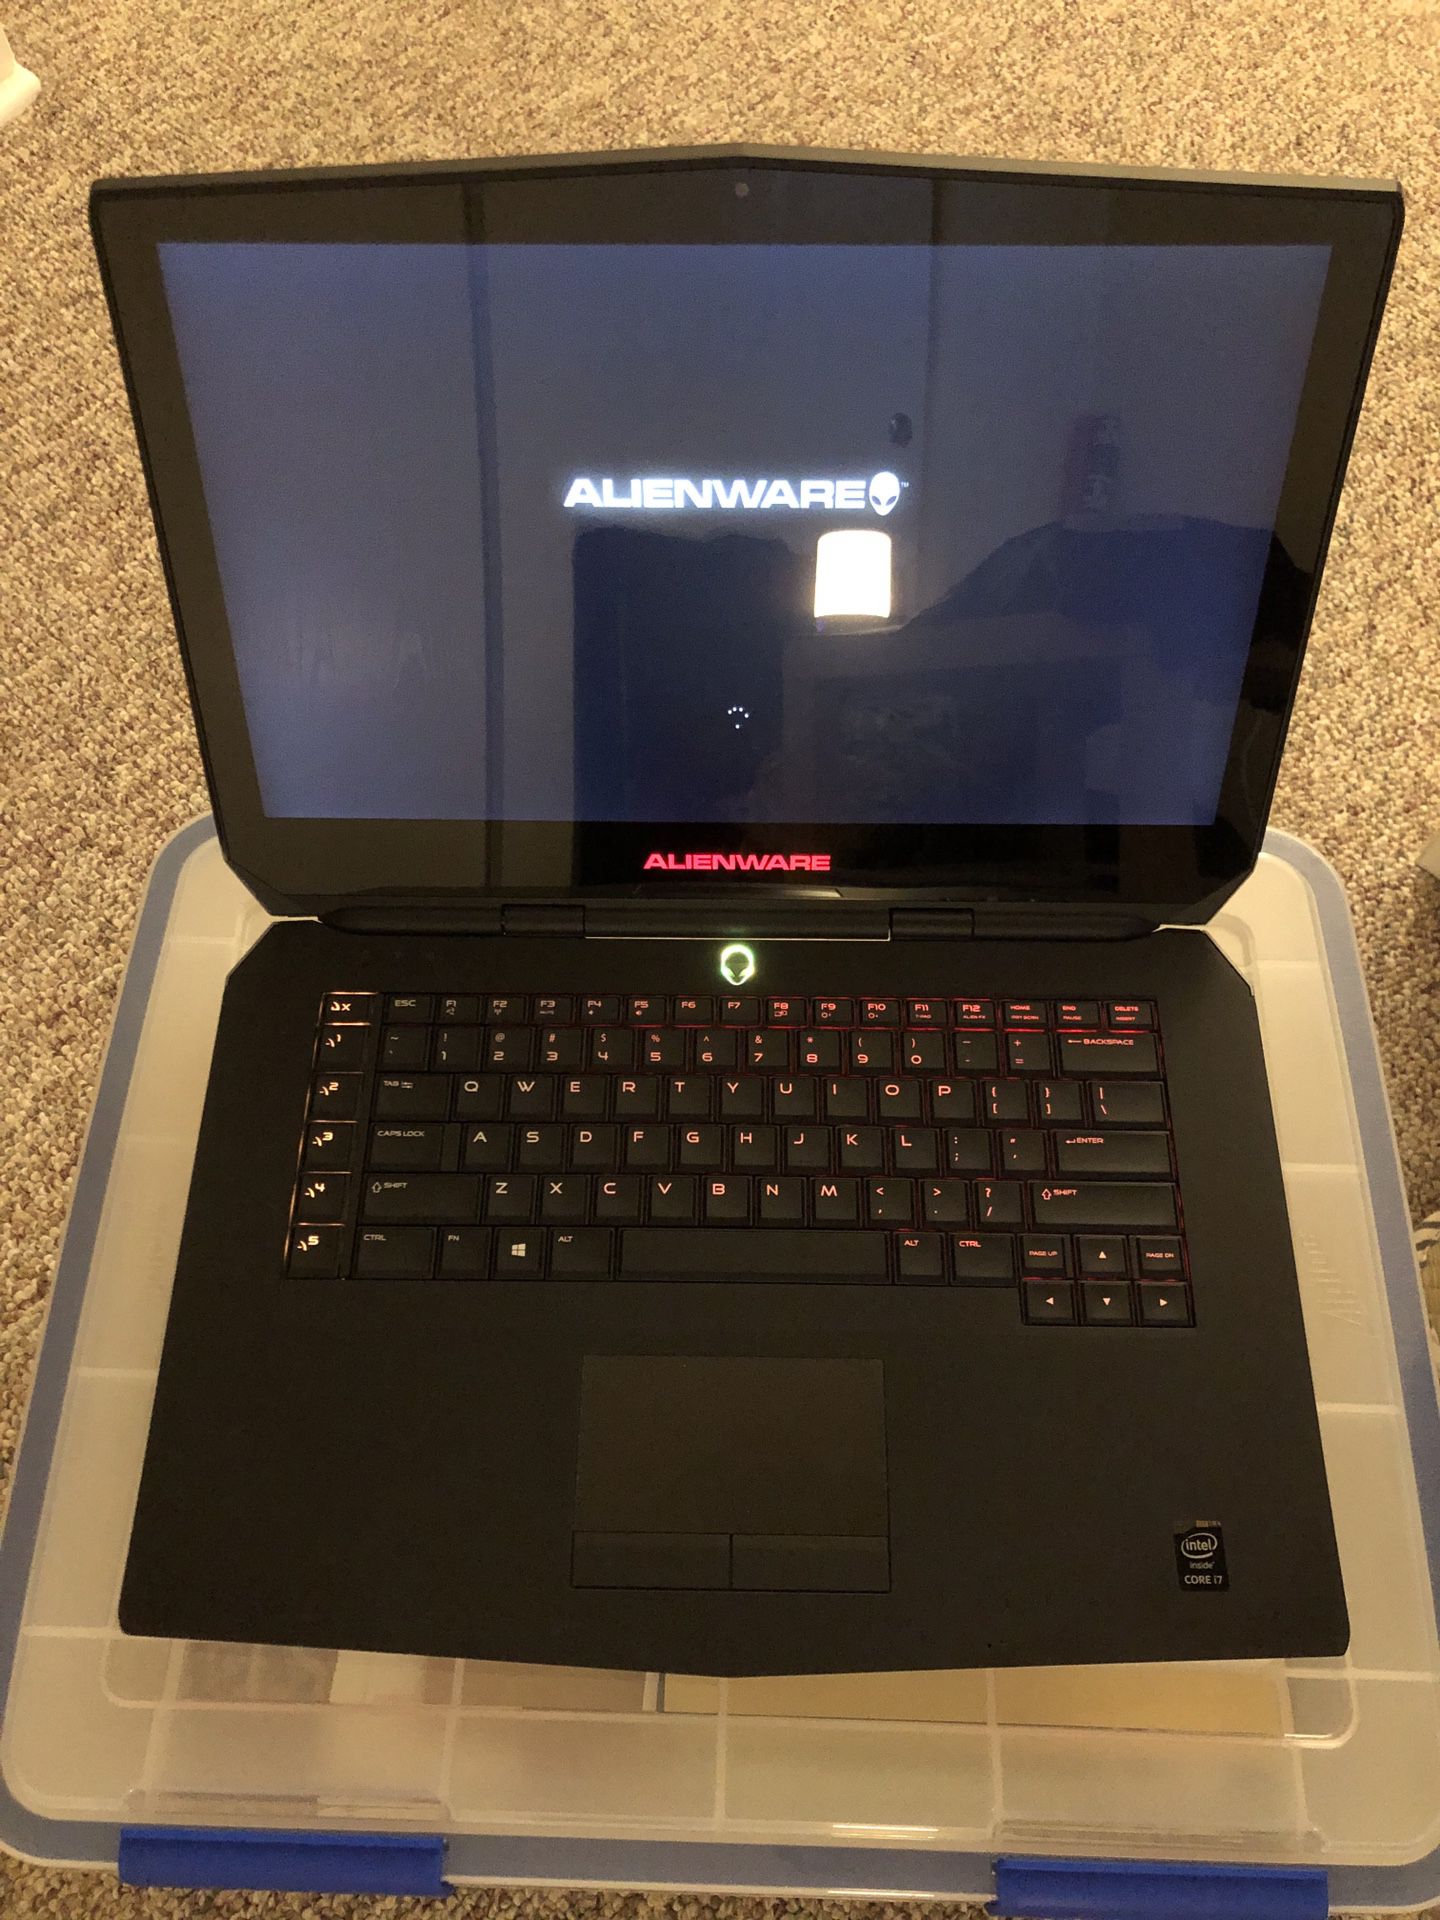 Alienware 15 R2 gaming laptop. SSD 128GB. Details on pic 4